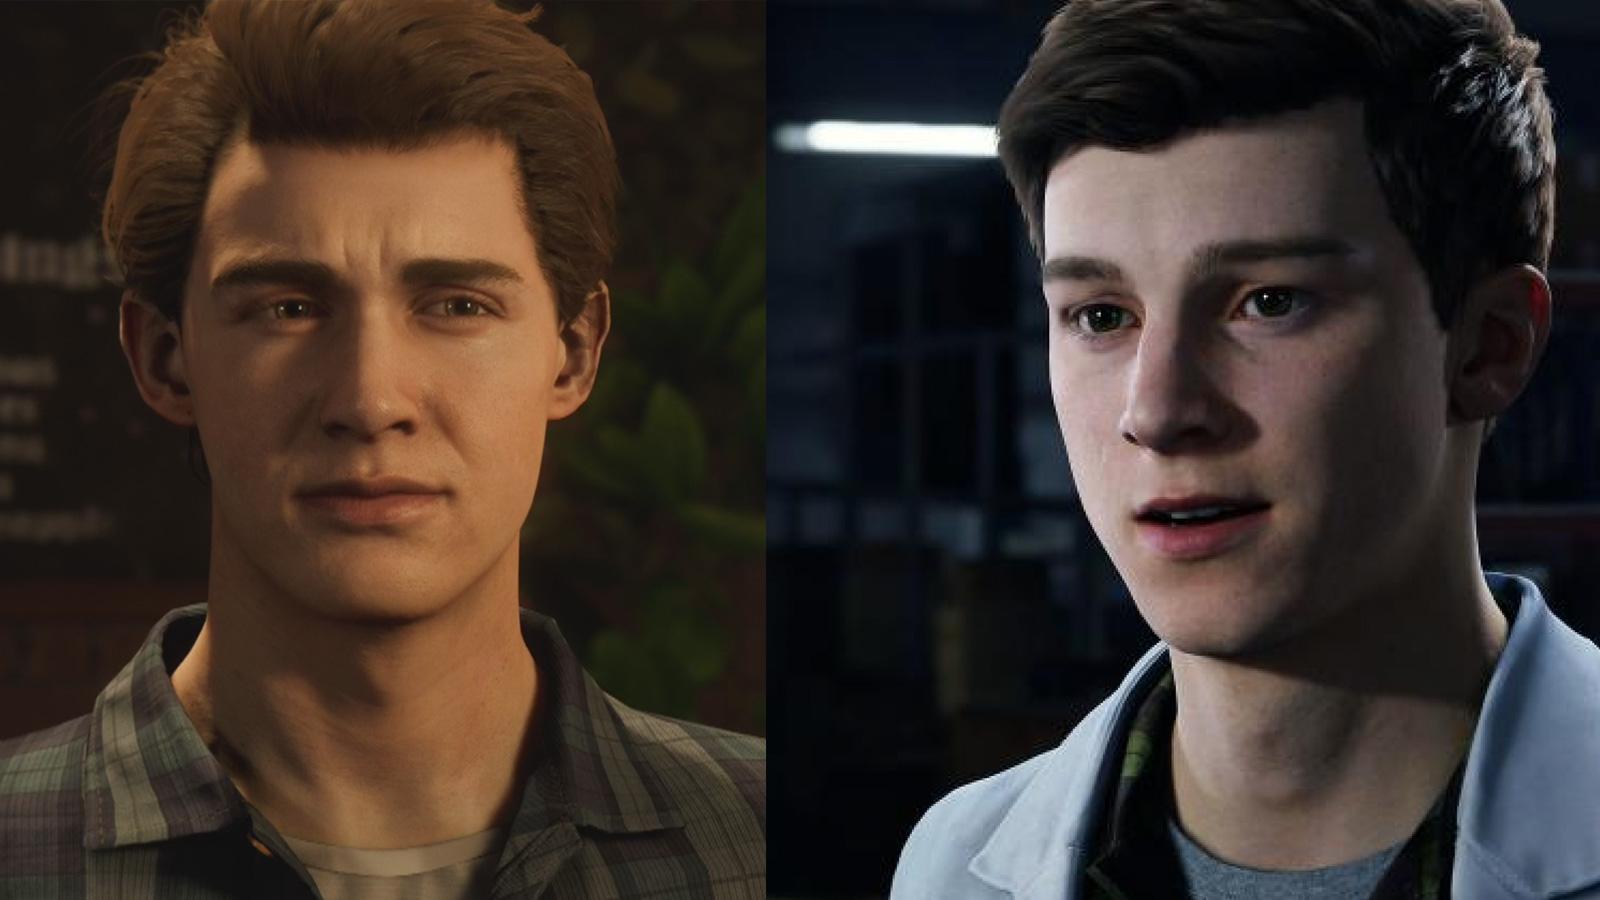 character model change in spider-man remastered for PS5